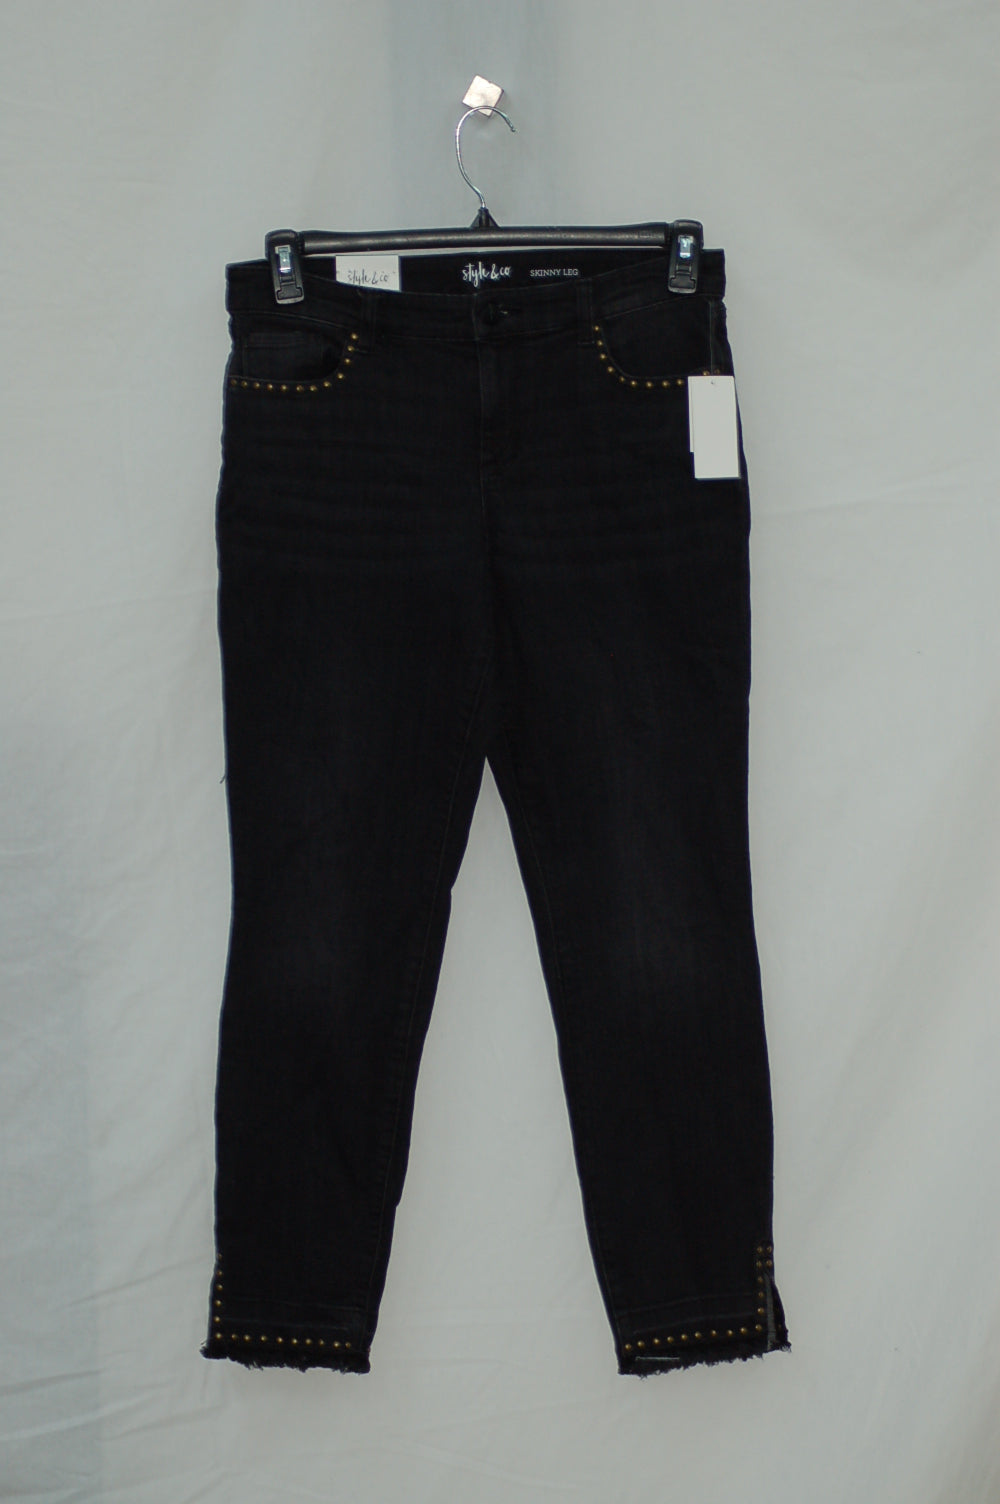 Style Co Studded Skinny Ankle Jeans Houston 12